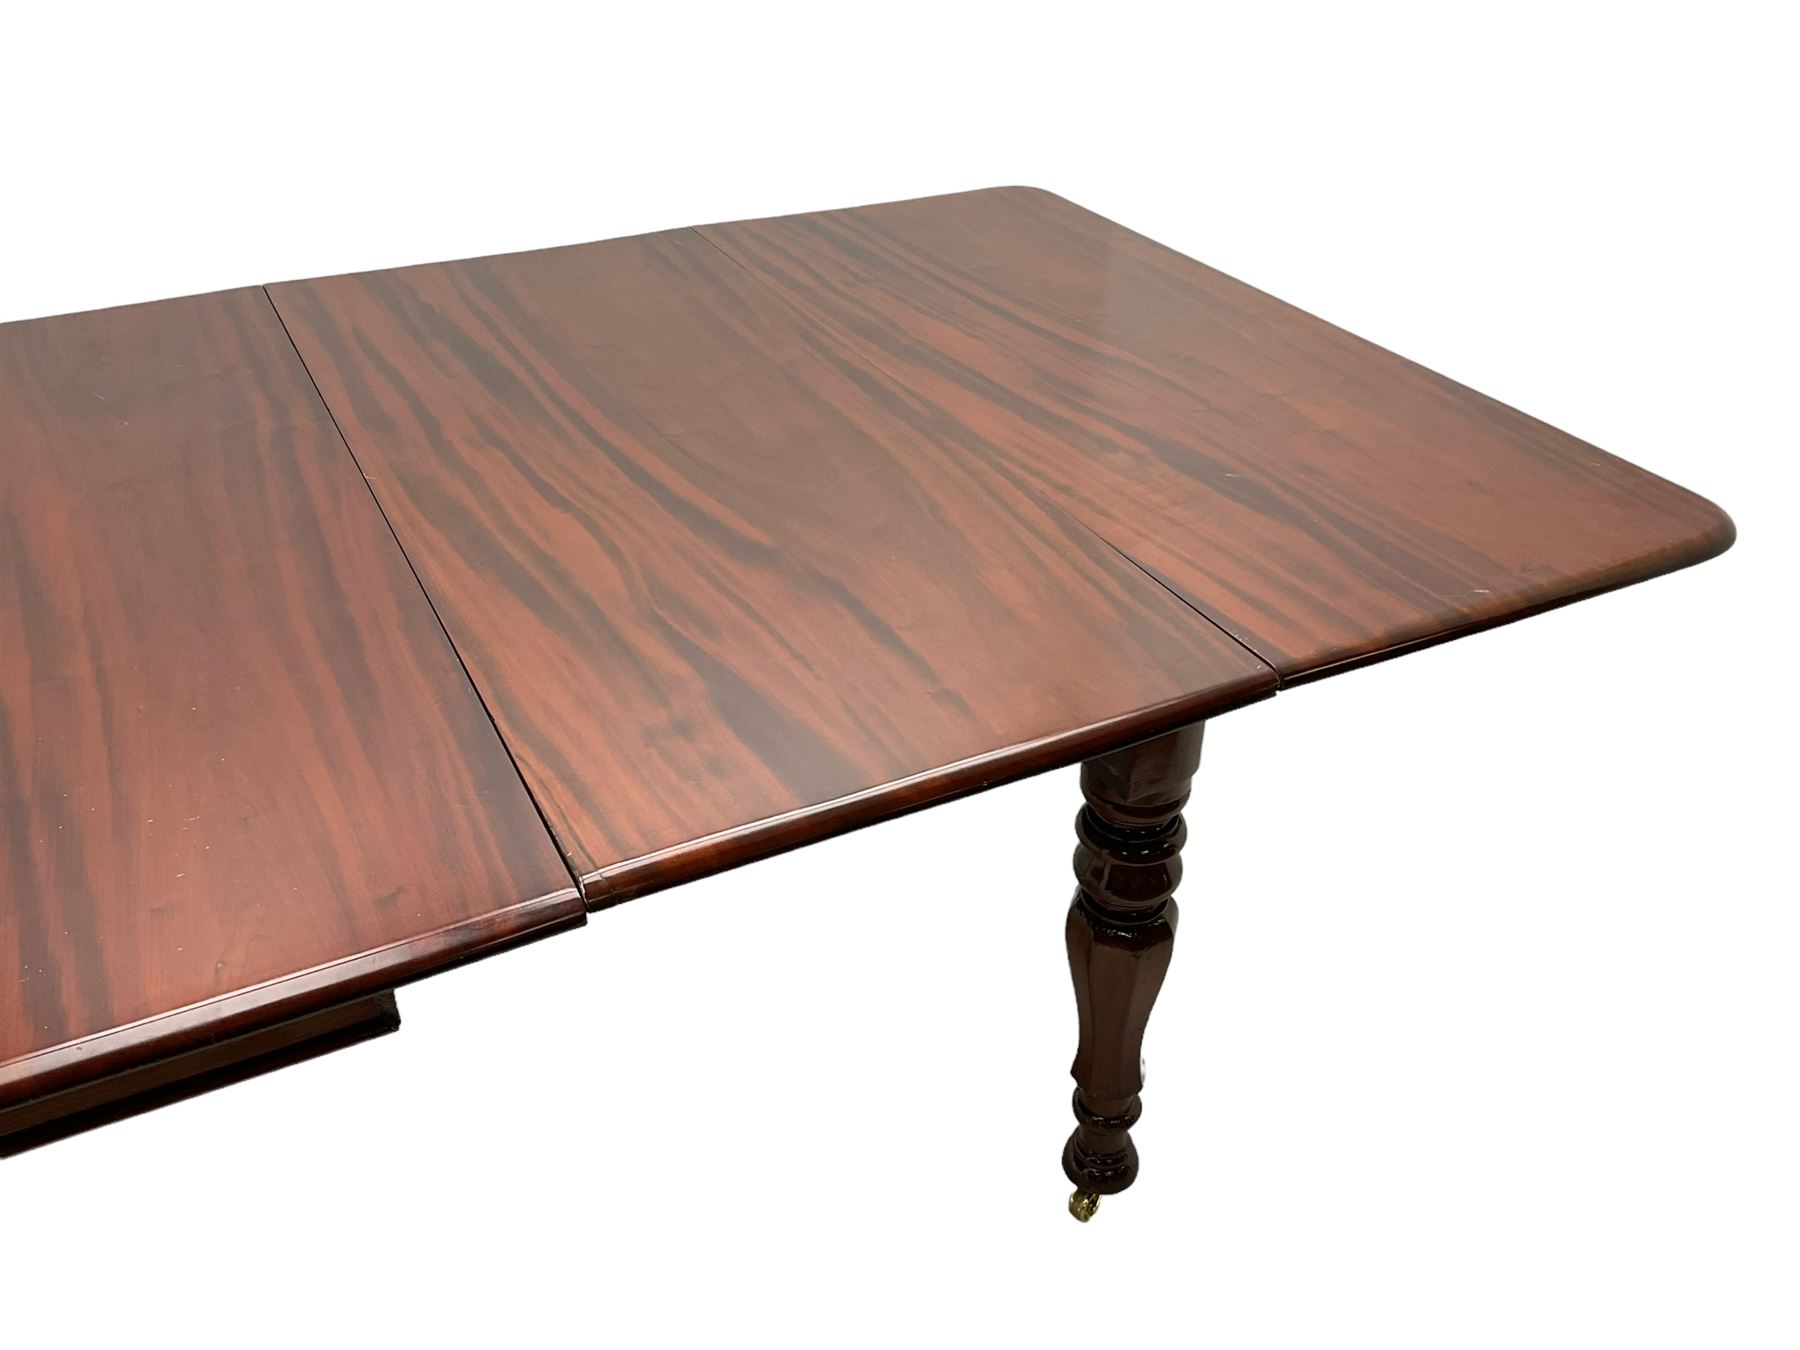 19th century mahogany extending dining table with three additional leaves - Image 4 of 15